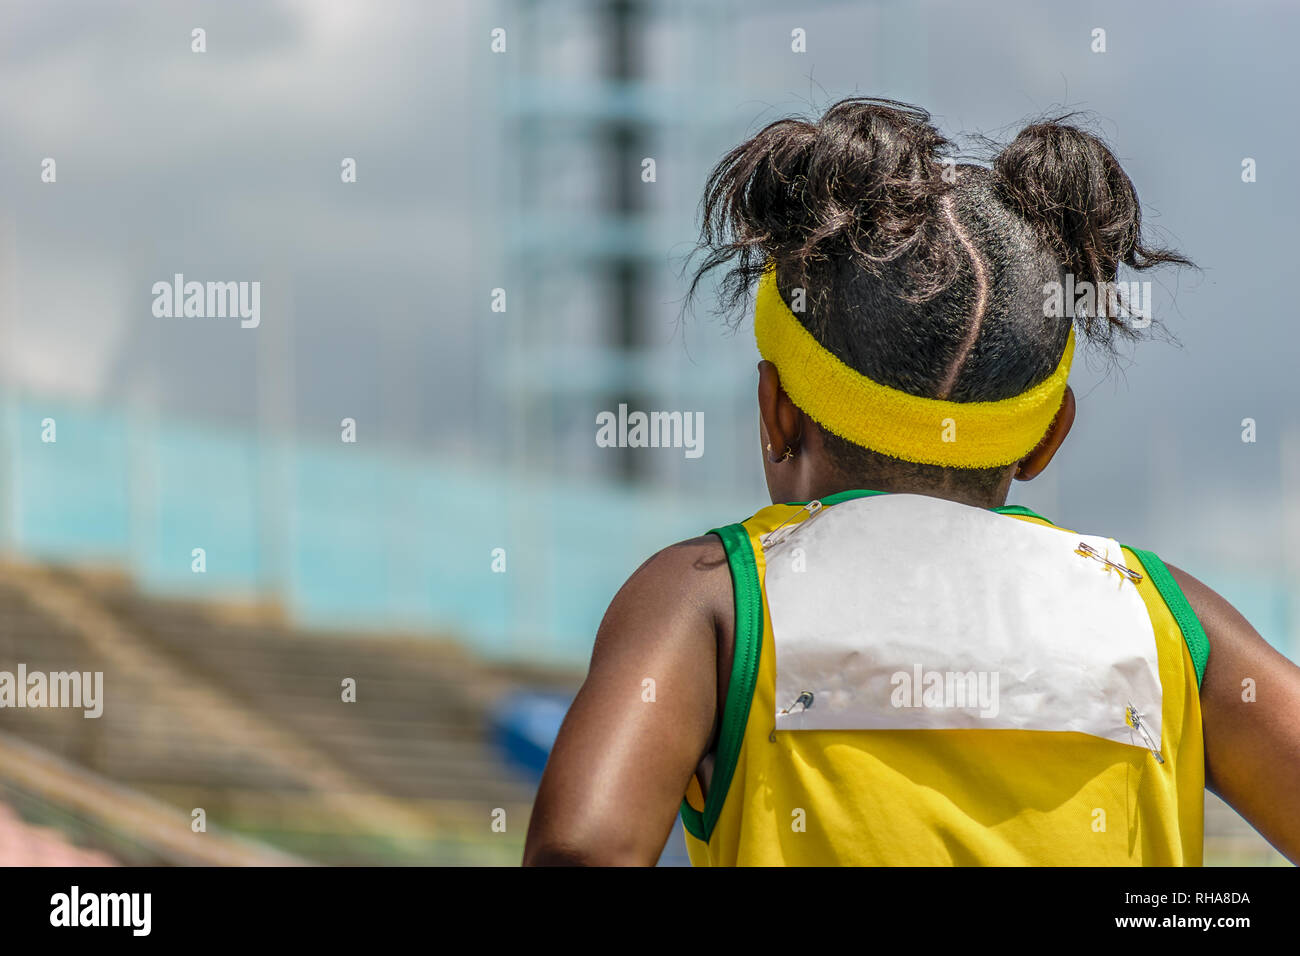 Young black female child athlete wearing yellow and green jersey and headband in outdoor track and field stadium Stock Photo